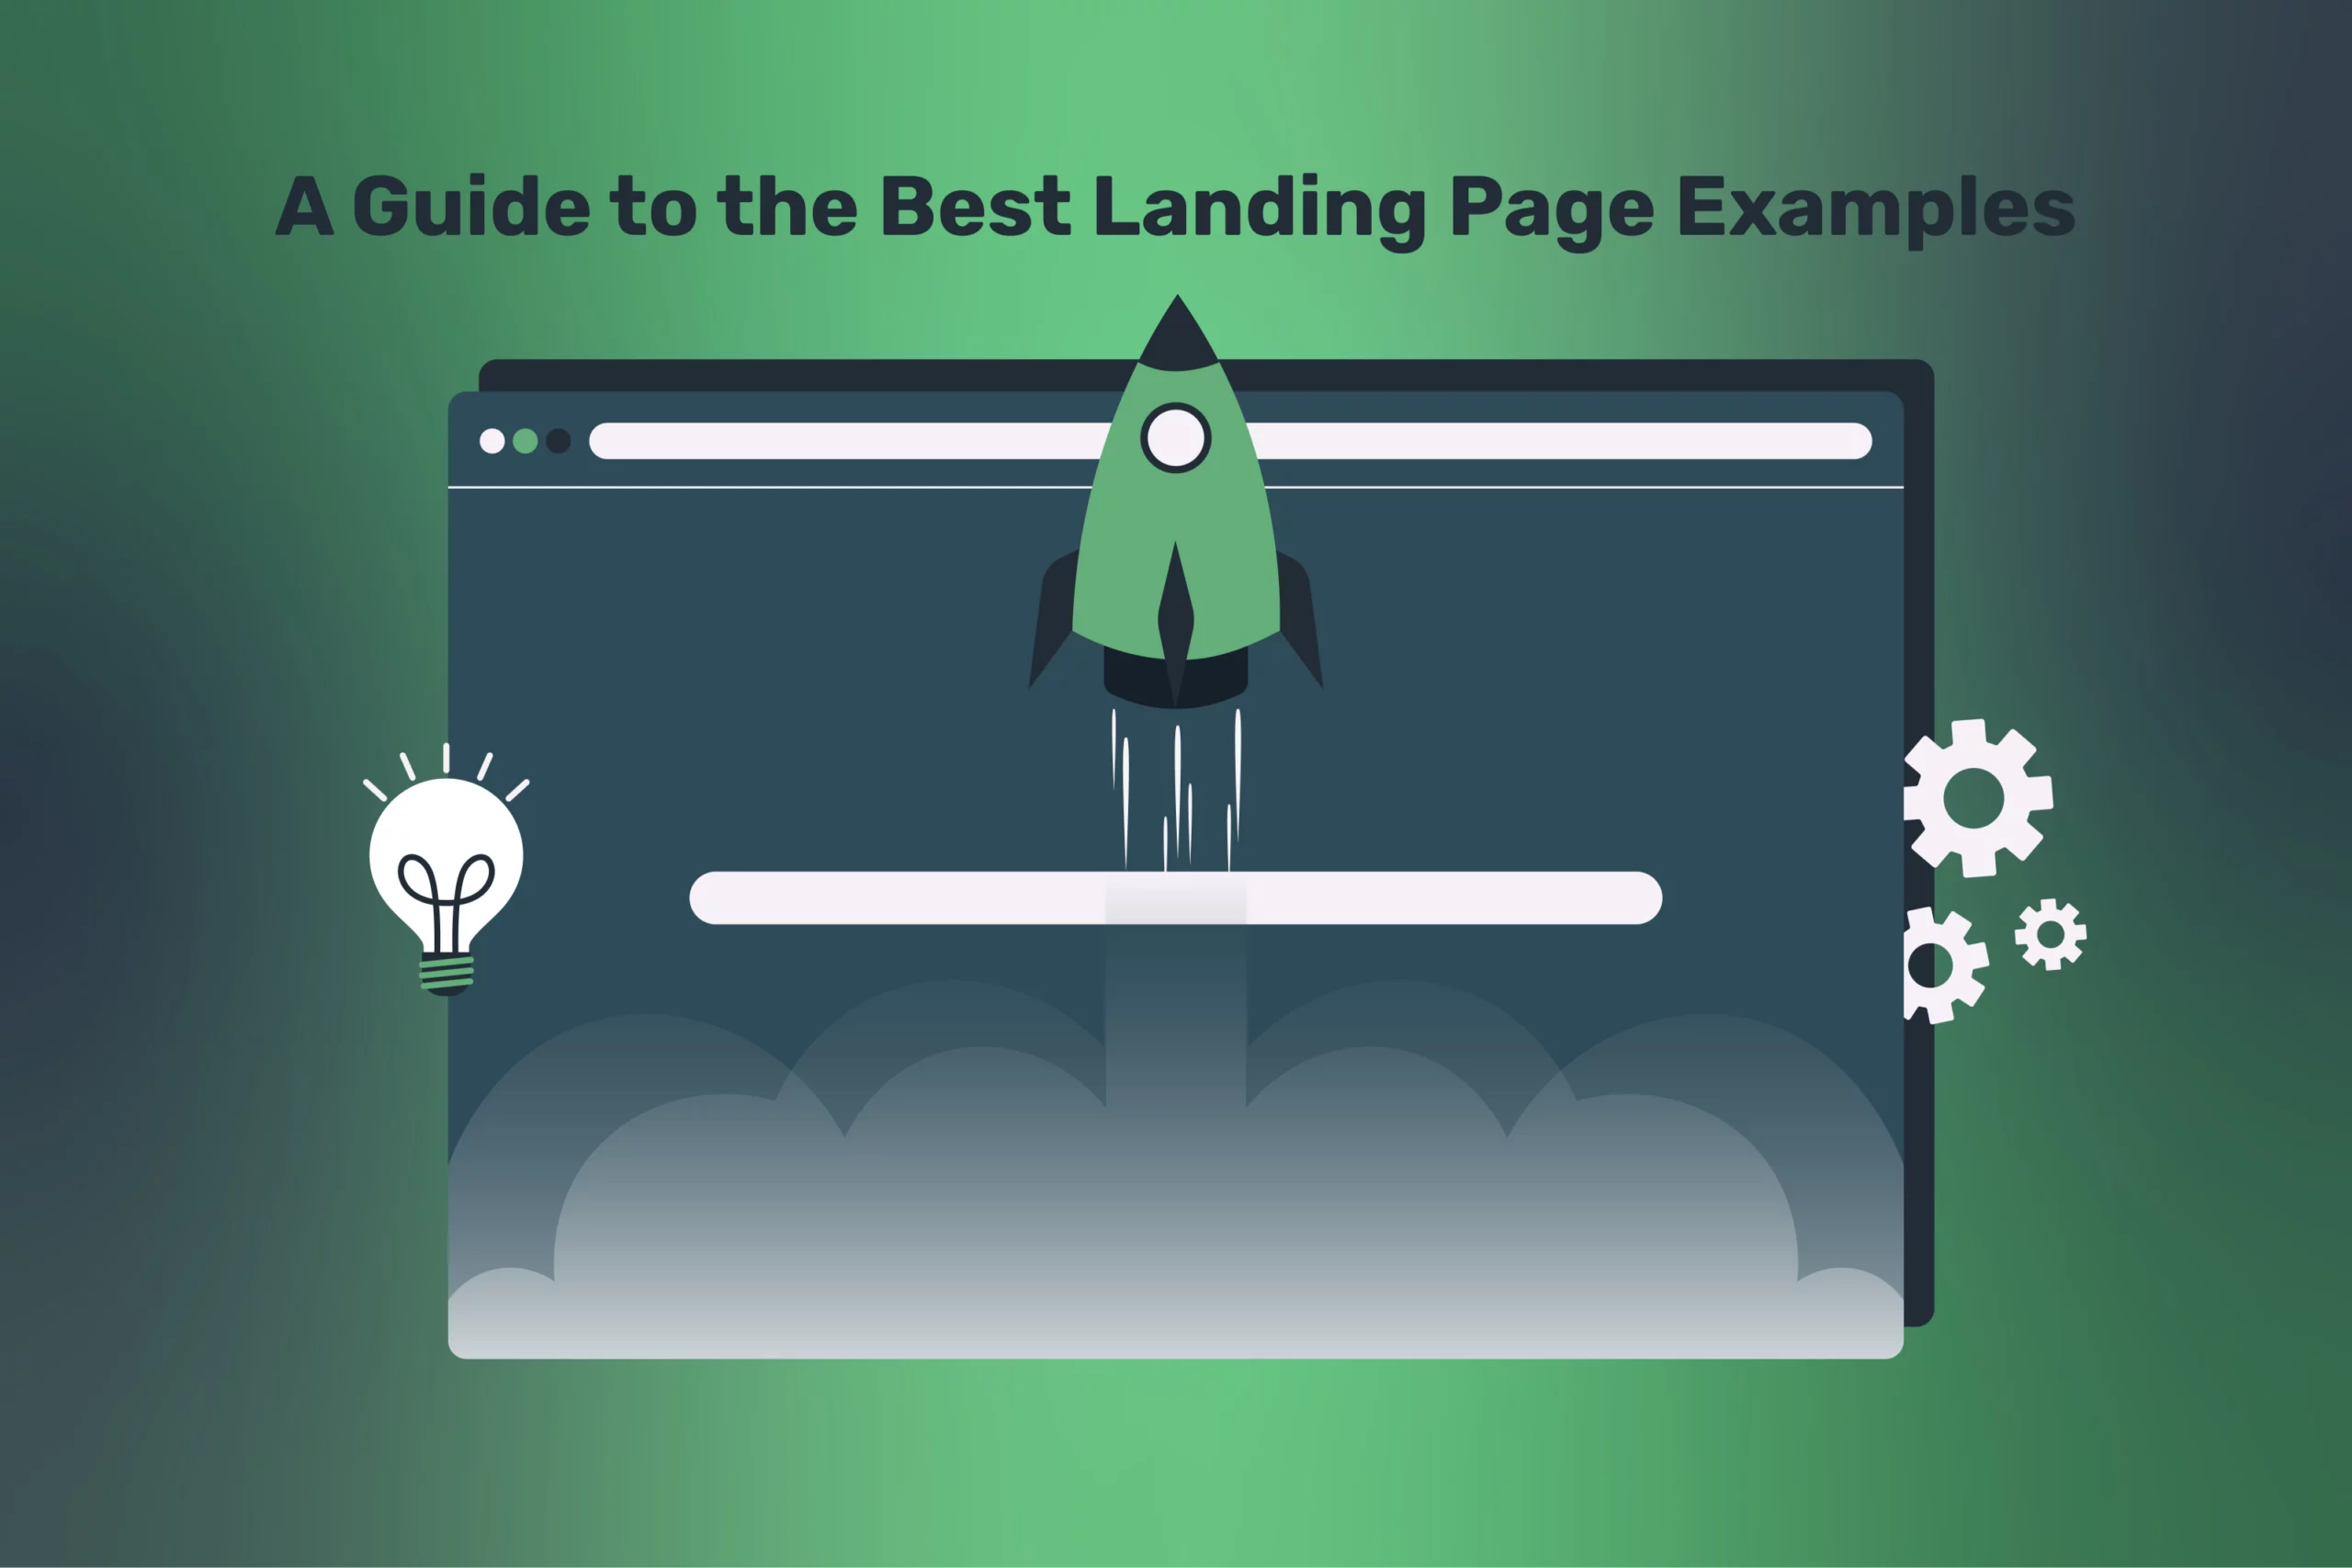 landing page examples